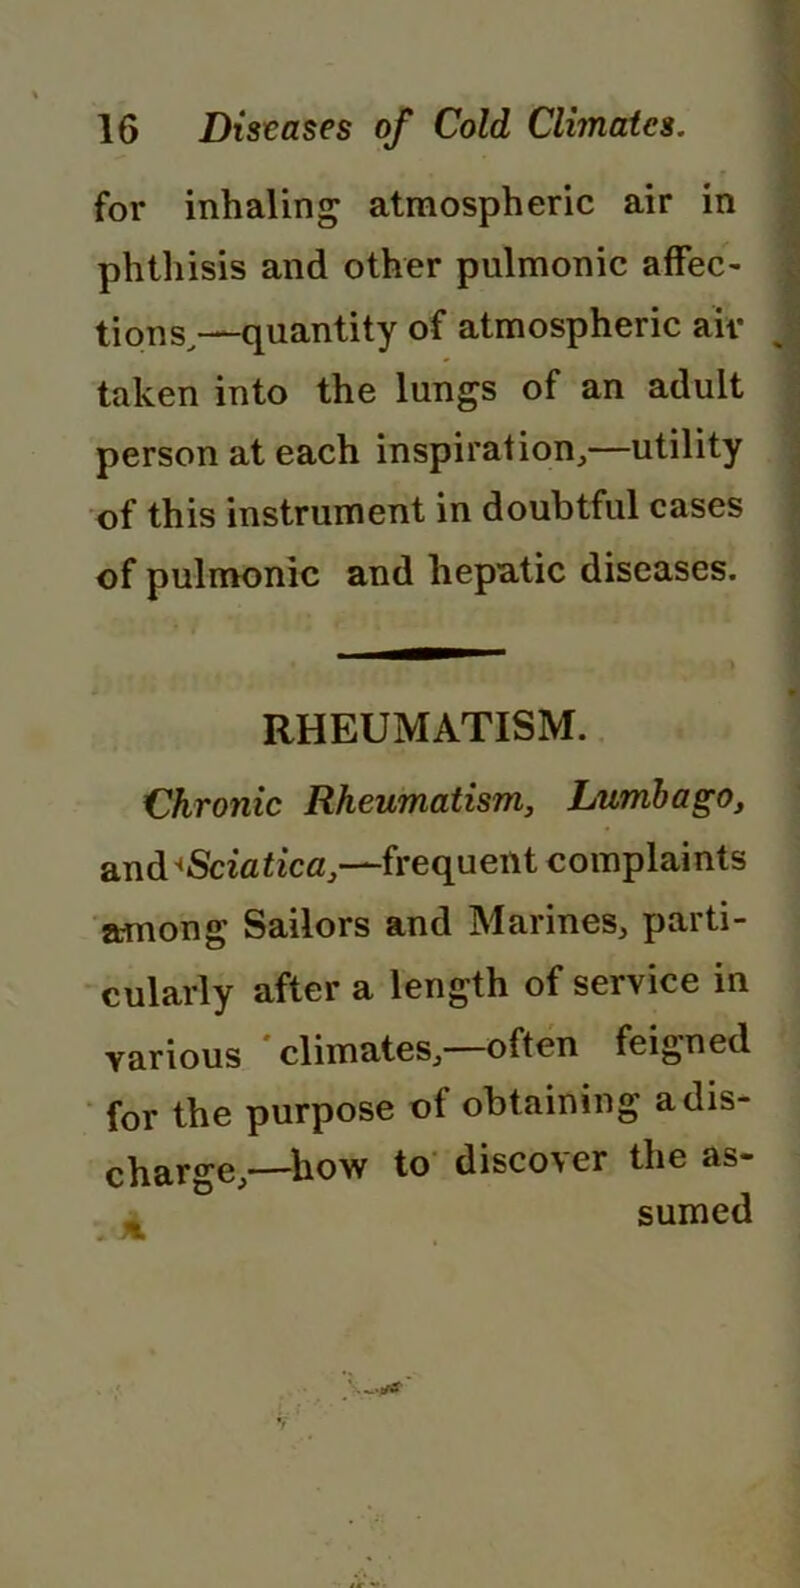 • • r for inhaling atmospheric air in phthisis and other pulmonic affec- tions,—quantity of atmospheric ait- taken into the lungs of an adult person at each inspiration,—utility of this instrument in doubtful cases of pulmonic and hepatic diseases. RHEUMATISM. Chronic Rheumatism, Lumbago, and ^Sciatica,—frequent complaints among Sailors and Marines, parti- cularly after a length of service in various climates, often feigned for the purpose ot obtaining a dis- charge,—how to discover the as- sumed